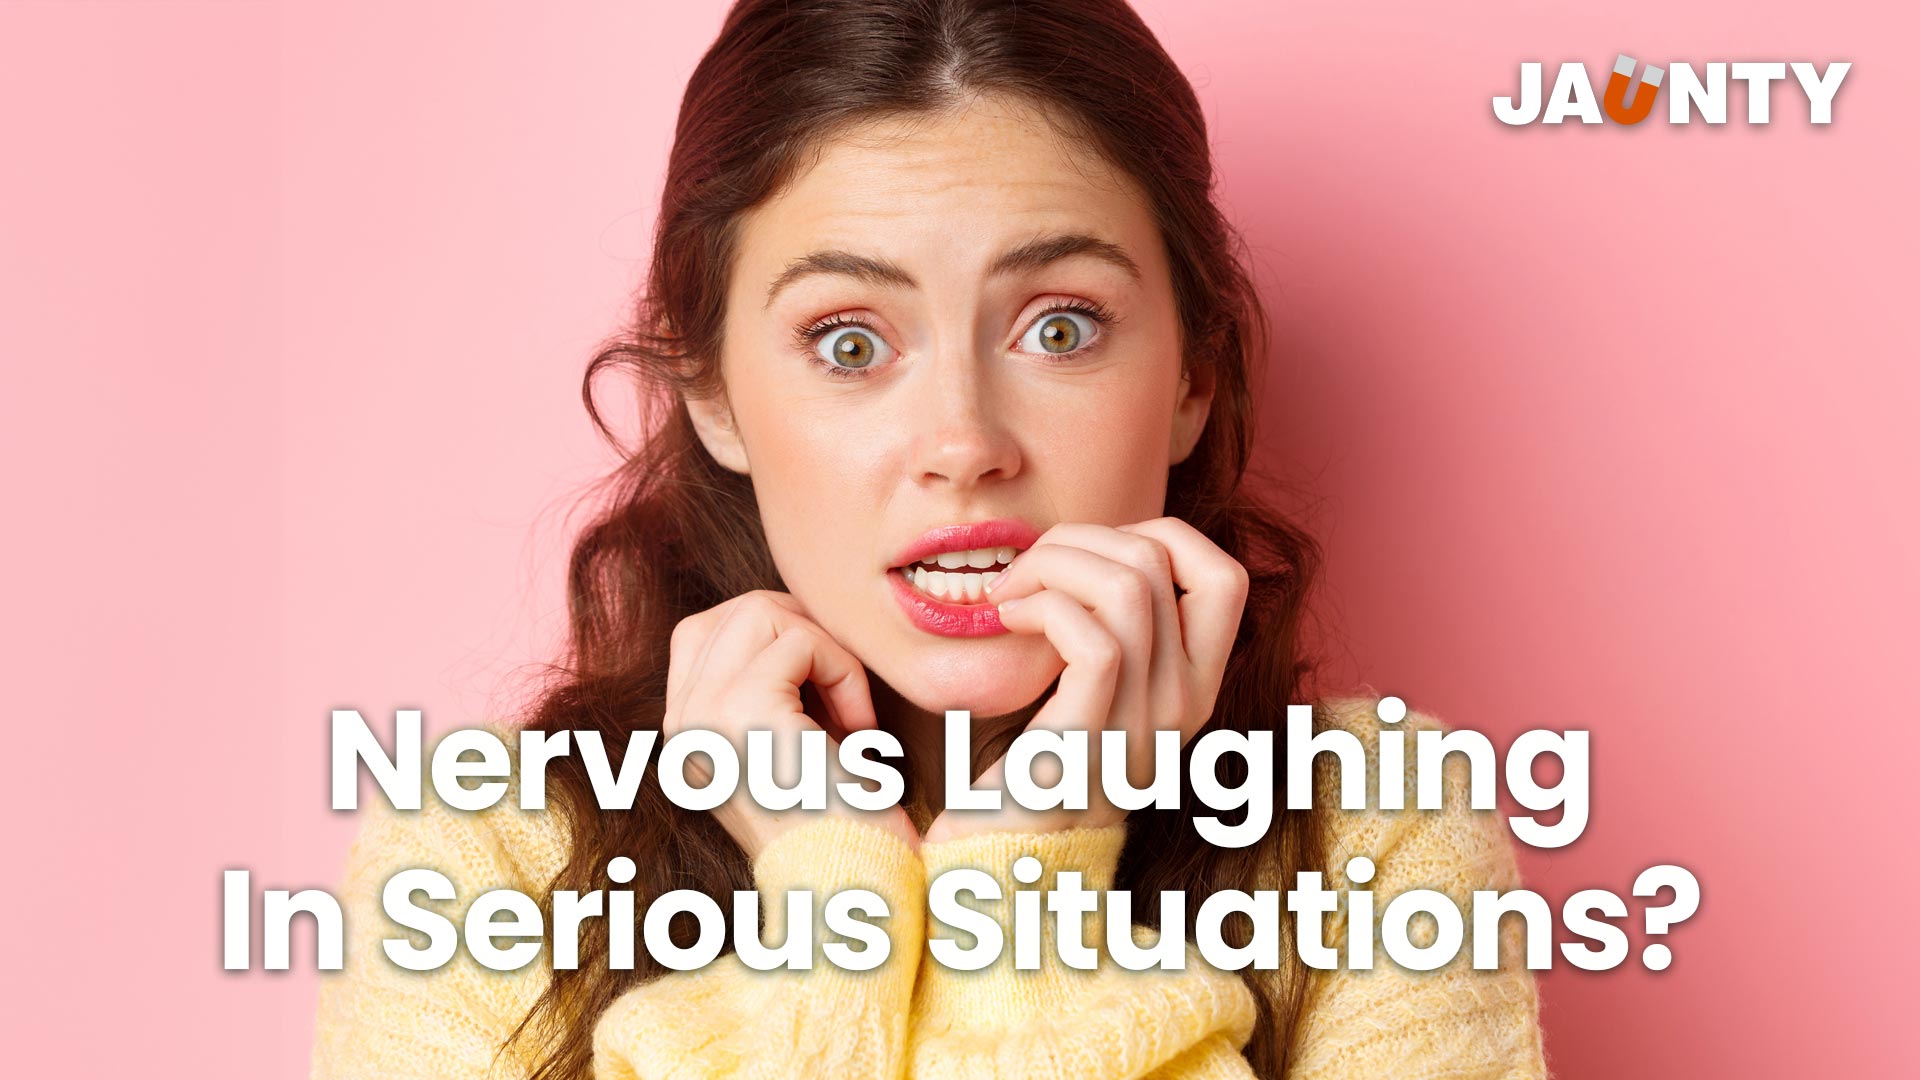 Nervous Laughter: Why Do I Laugh in Serious Situations?